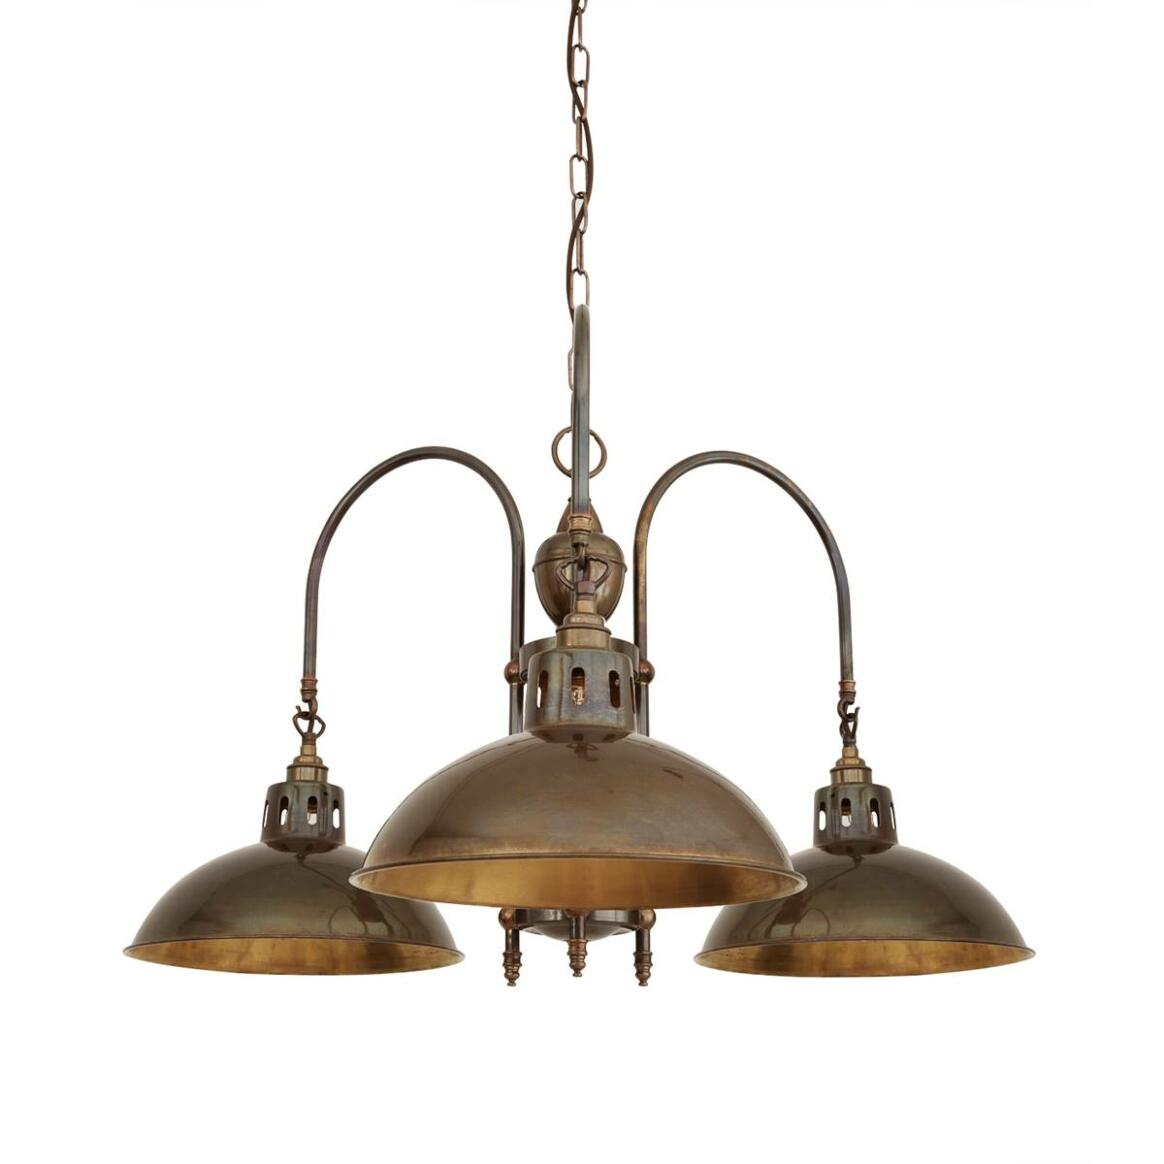 Goiania Industrial Brass Chandelier, Three-Arm main product image